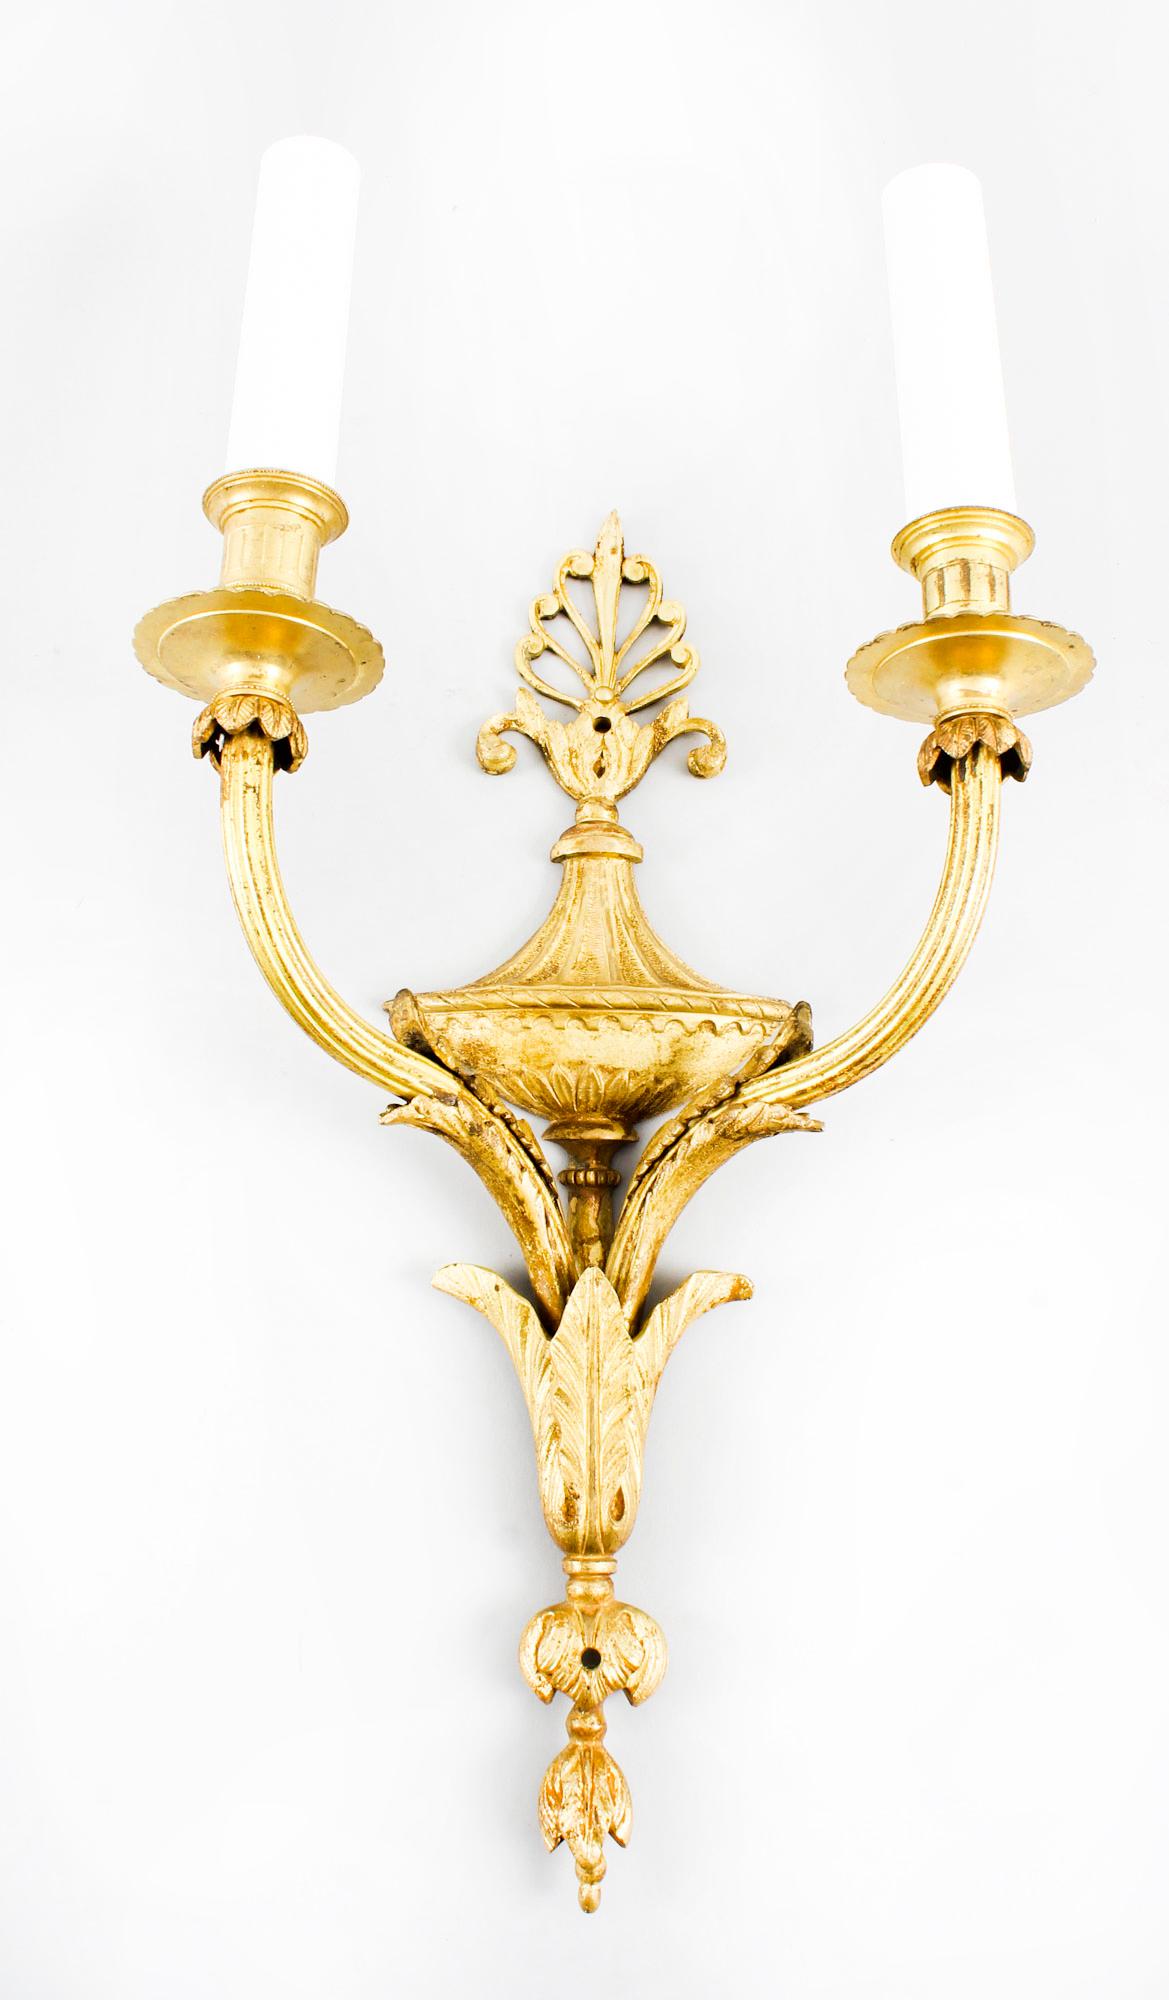 This is a stunning pair of Regency style twin branch ormolu wall lights dating from the late 19th century.

The lights feature classical Regency elements with anthemion, classical urn and palmette cast backplates issuing twin reeded scrolled